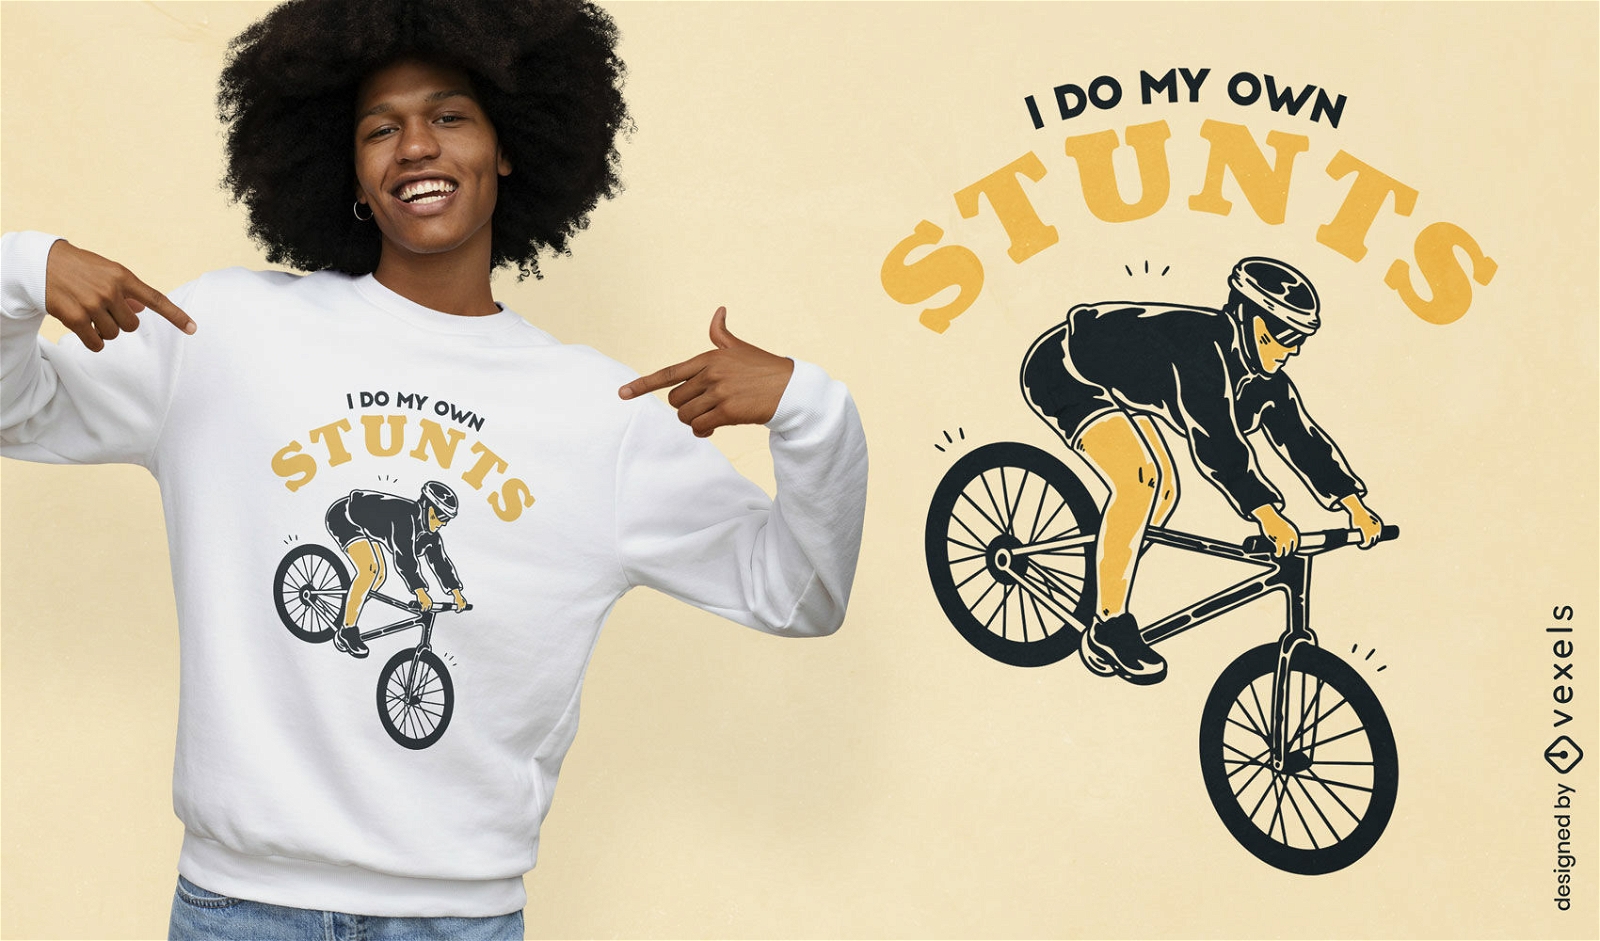 Person riding bicycle stunt quote t-shirt design